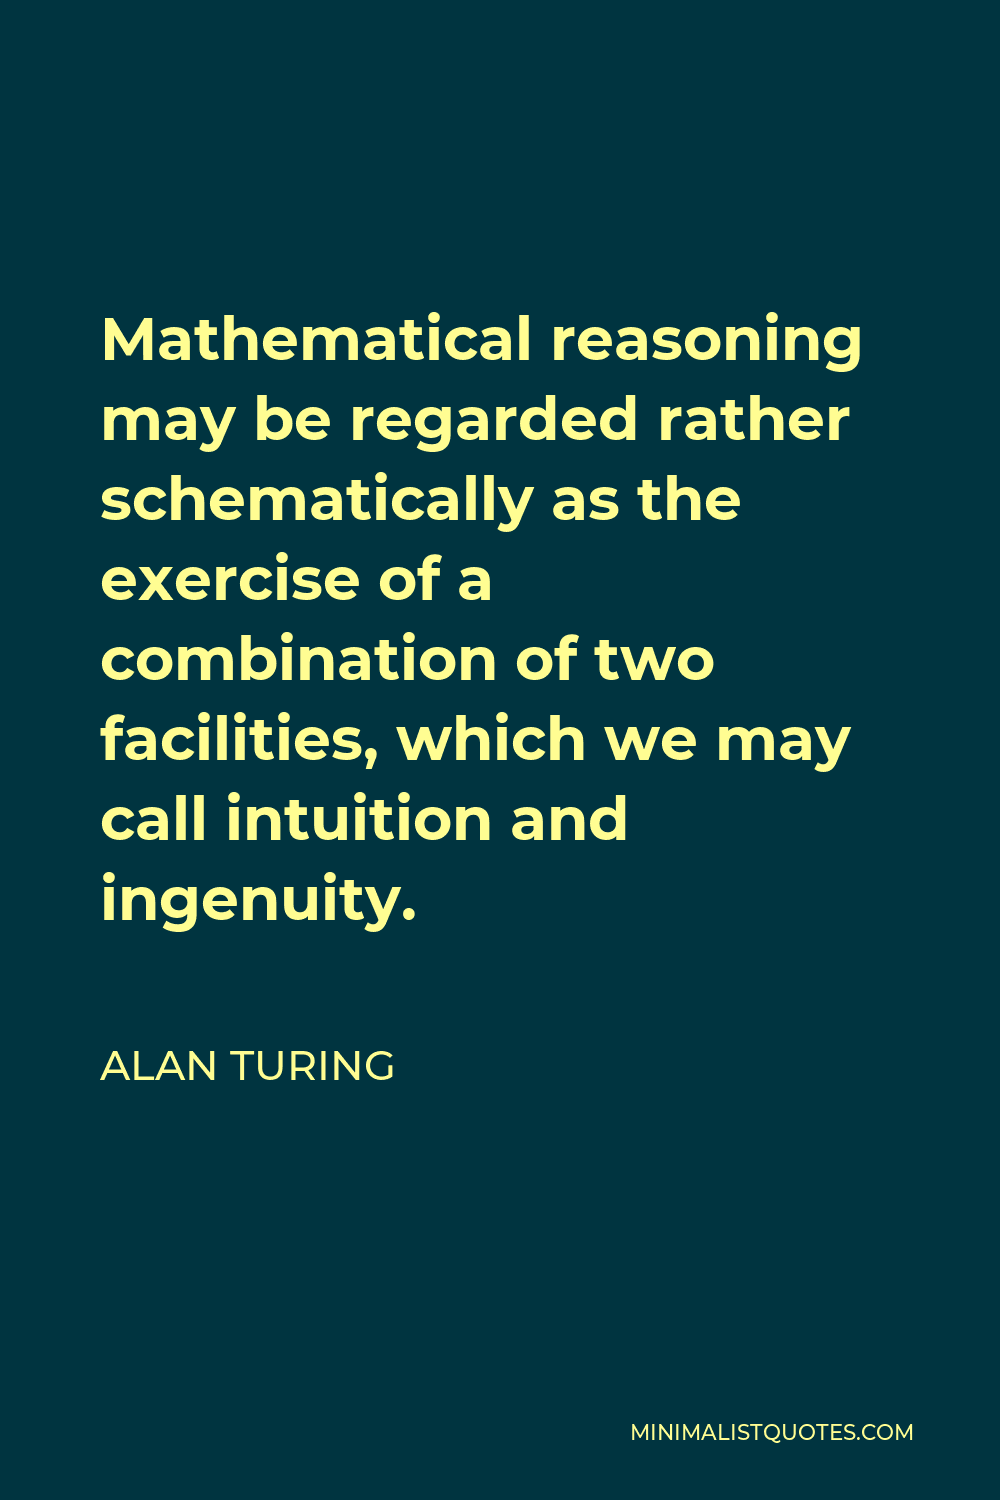 Alan Turing Quote - Mathematical reasoning may be regarded rather schematically as the exercise of a combination of two facilities, which we may call intuition and ingenuity.